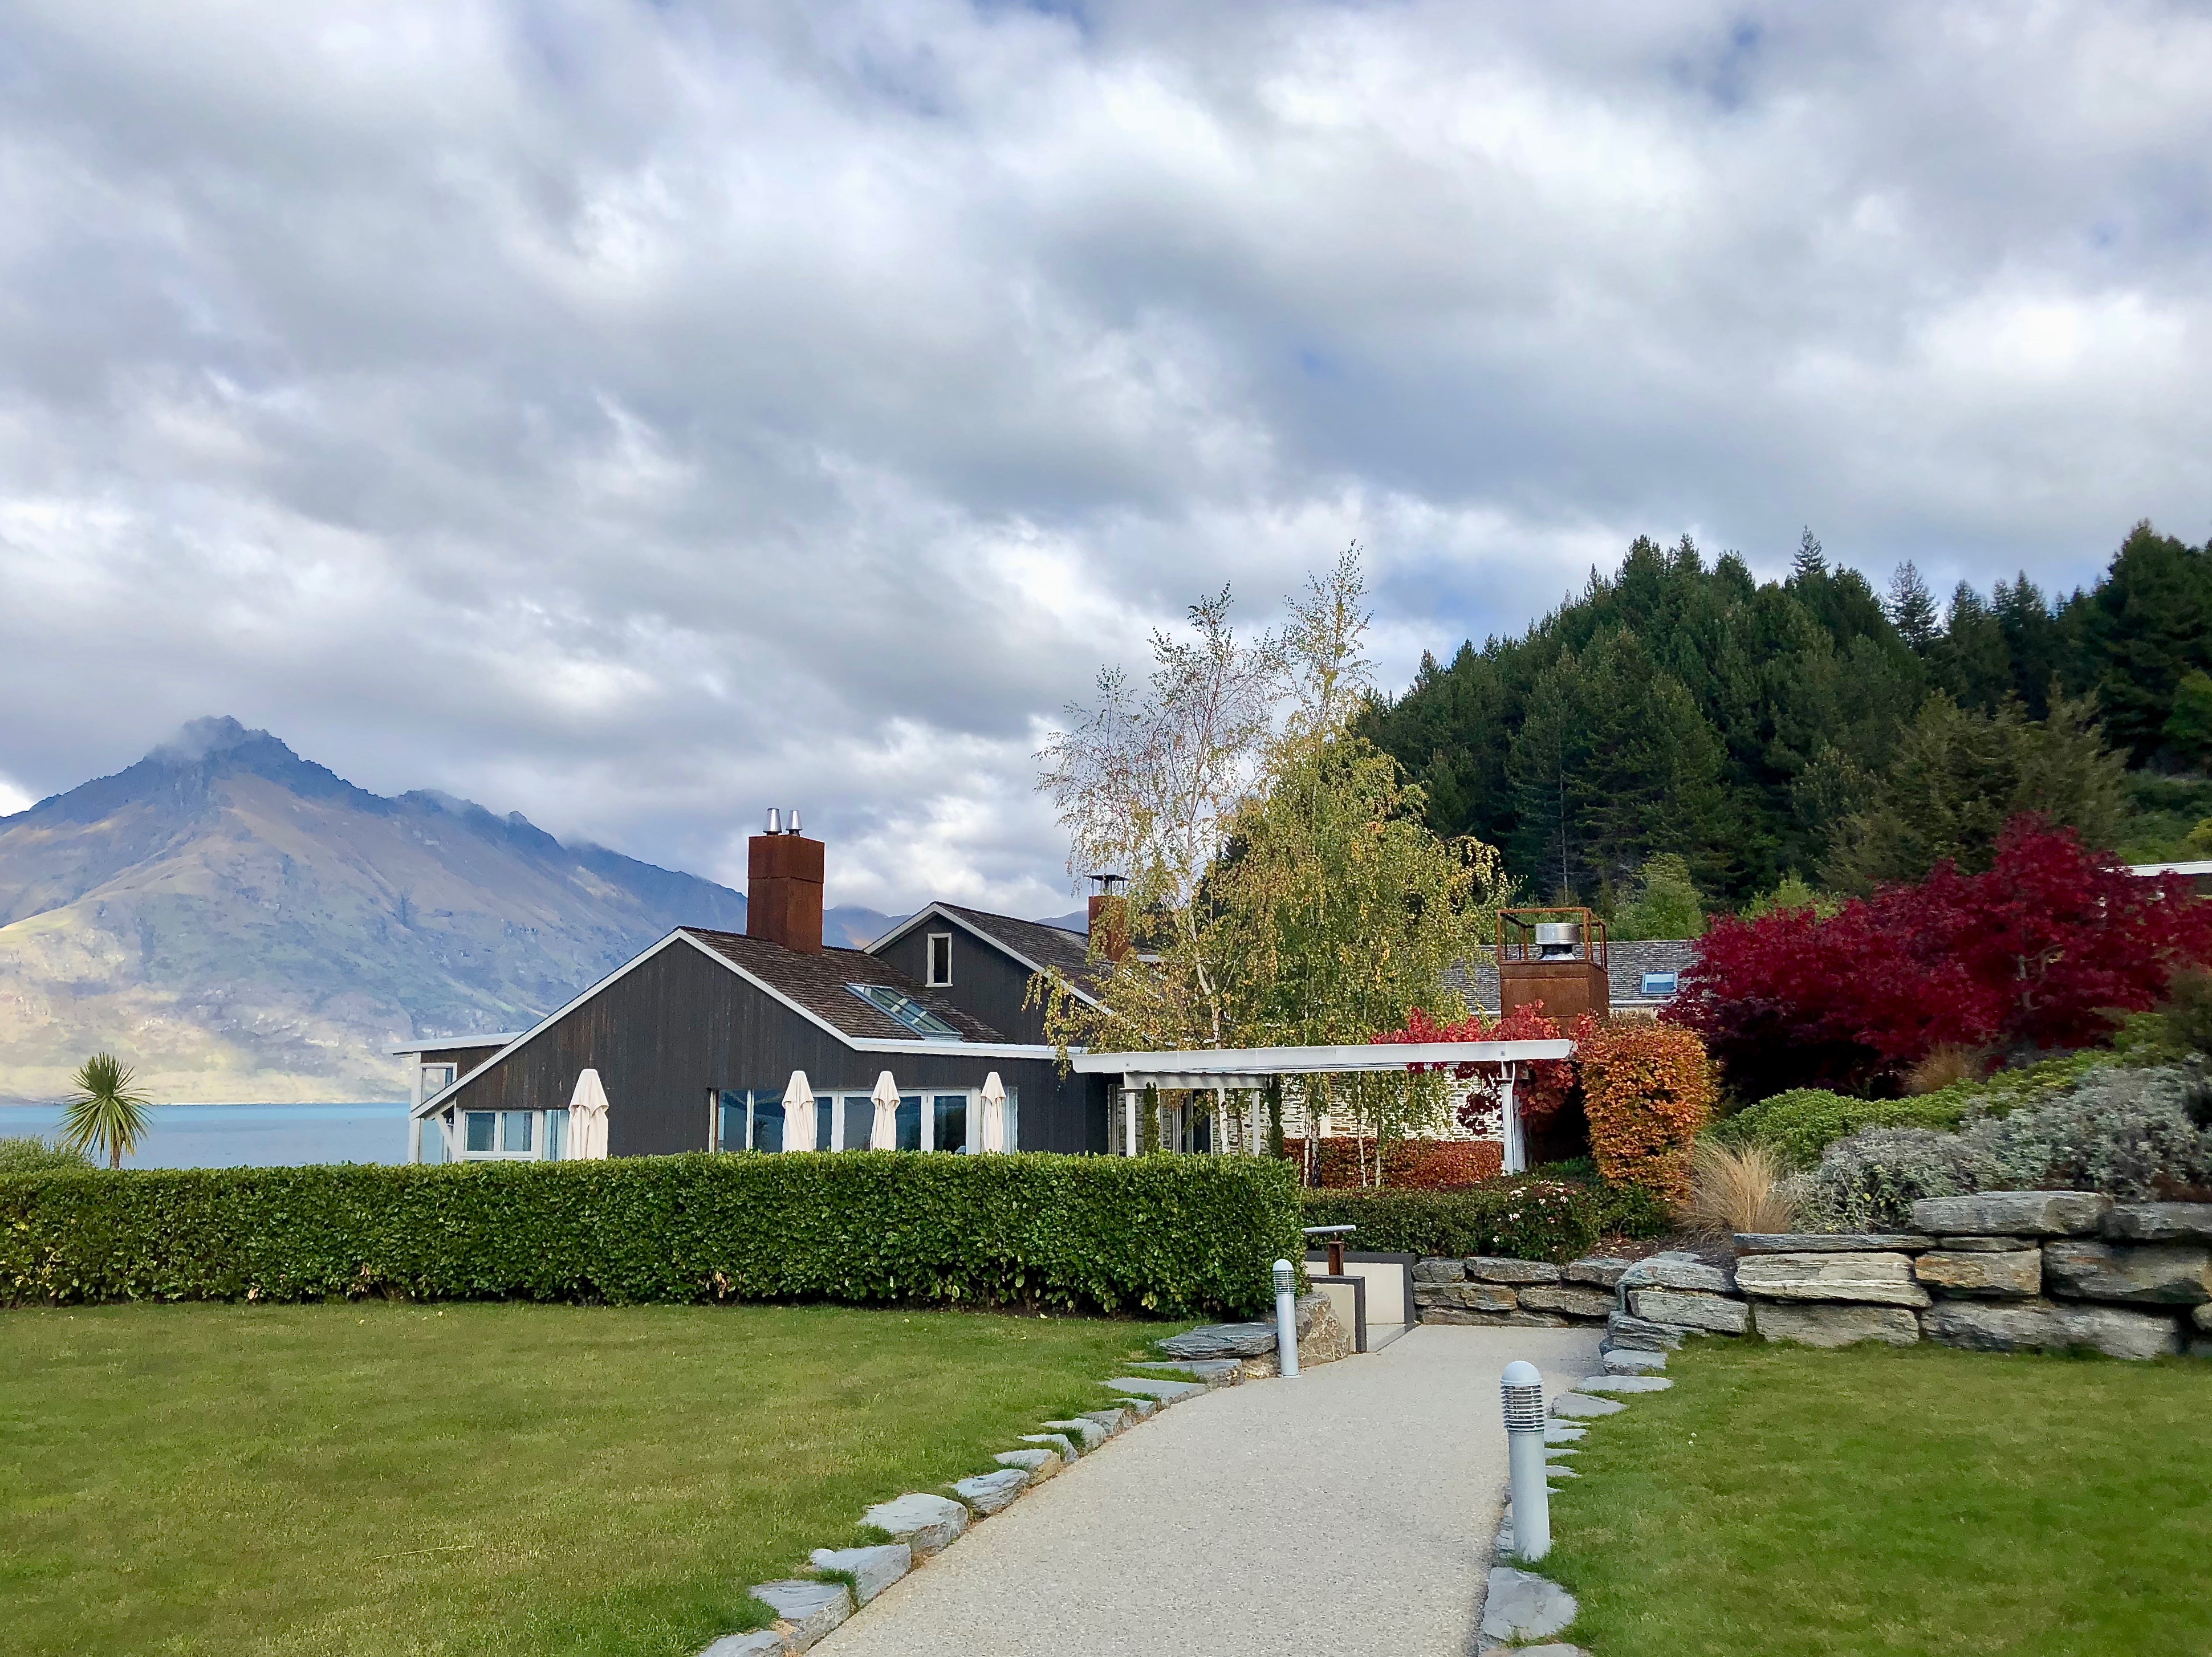 Hotel Review: Matakauri Lodge | The Hungry Chronicles